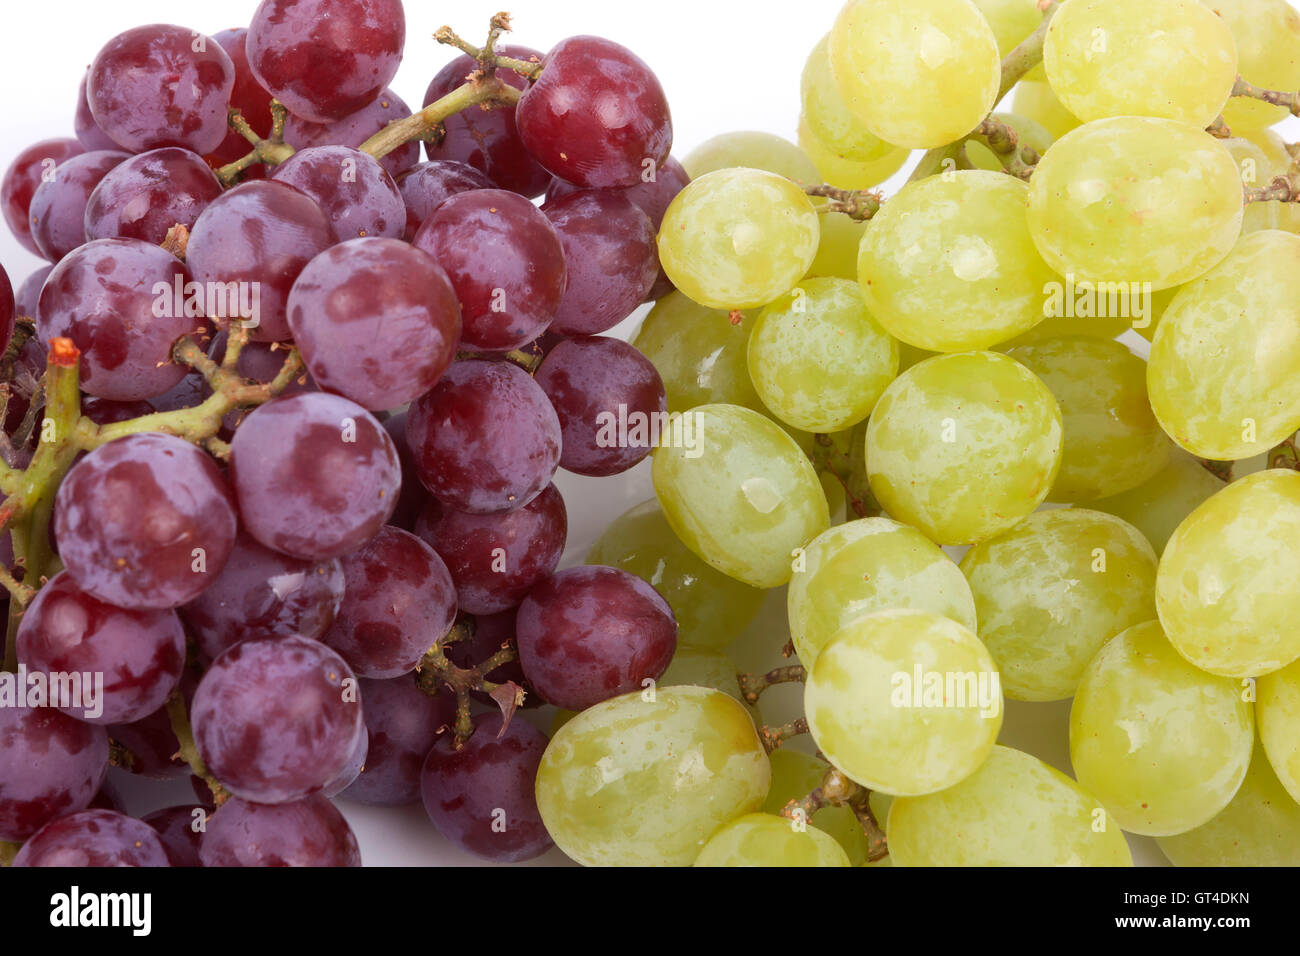 bunch of green and red grapes on a white background Stock Photo